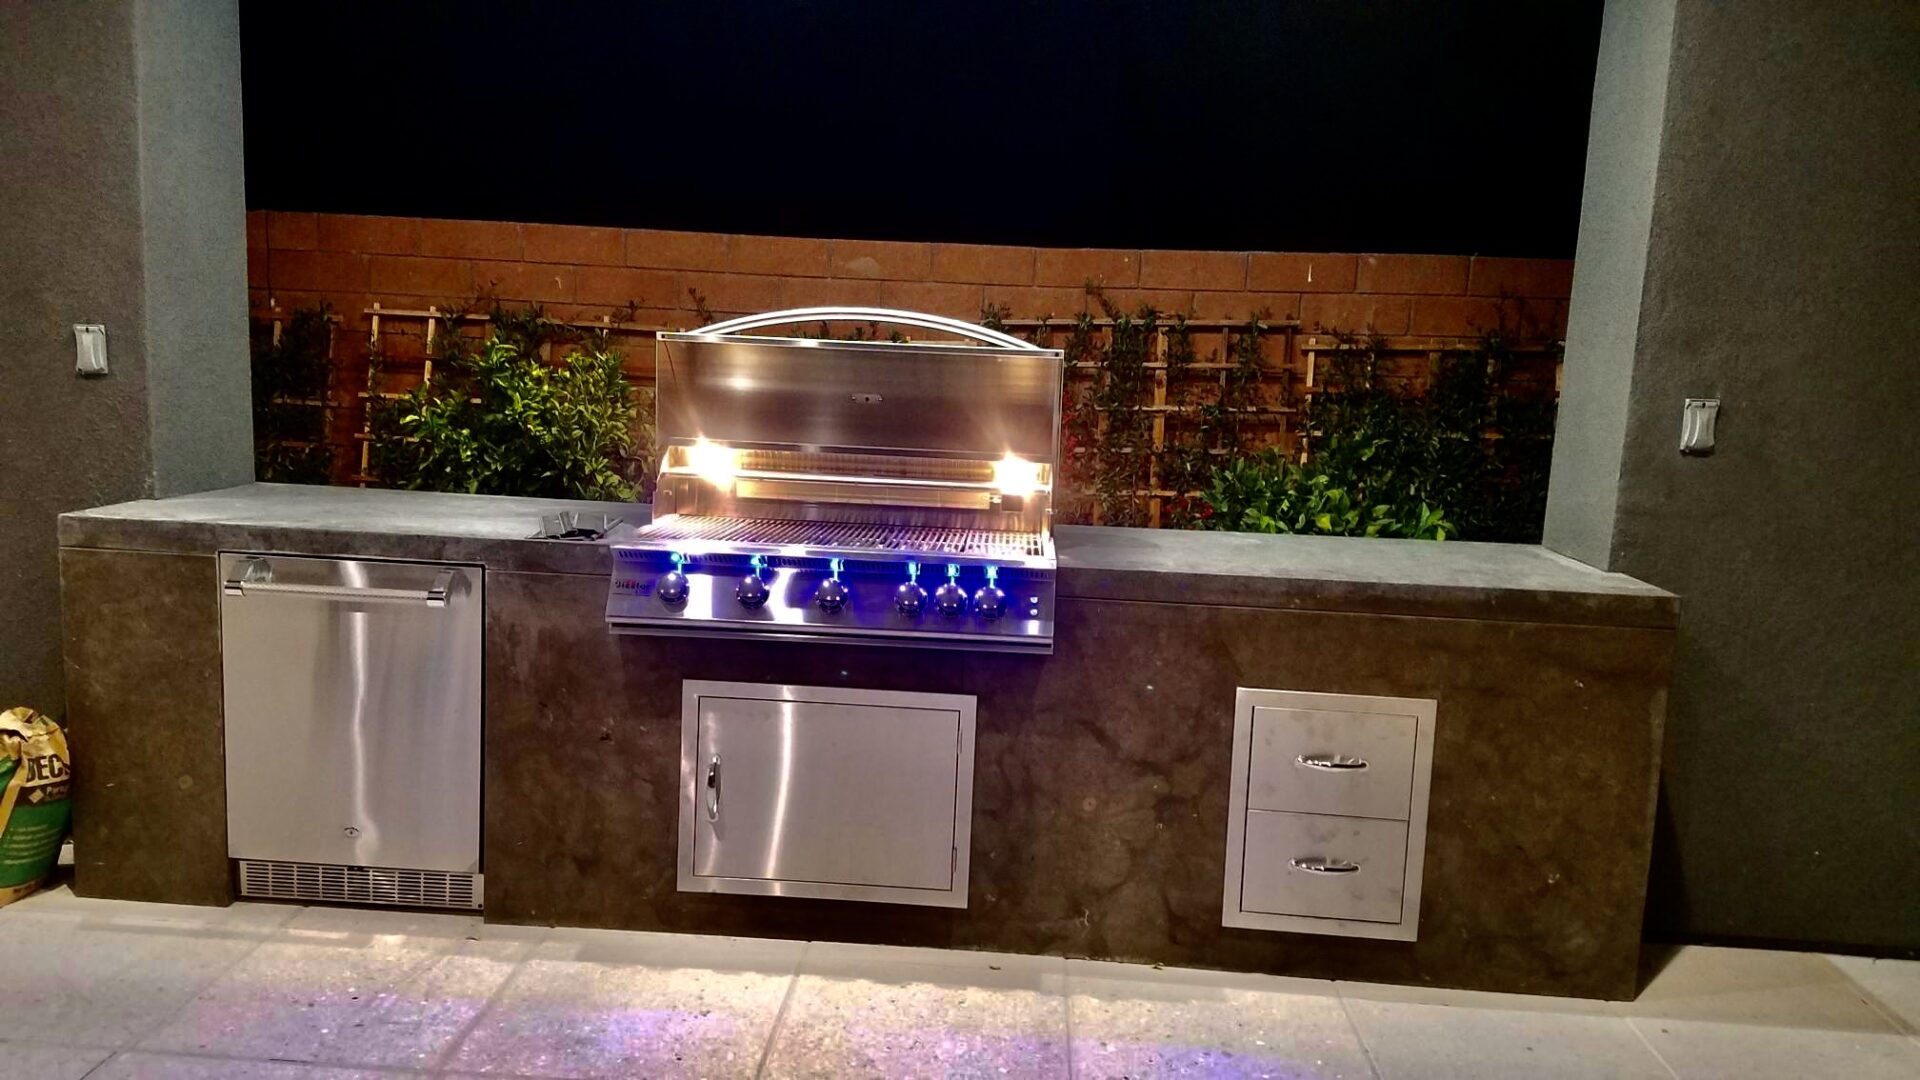 A grill with lights on top of it.